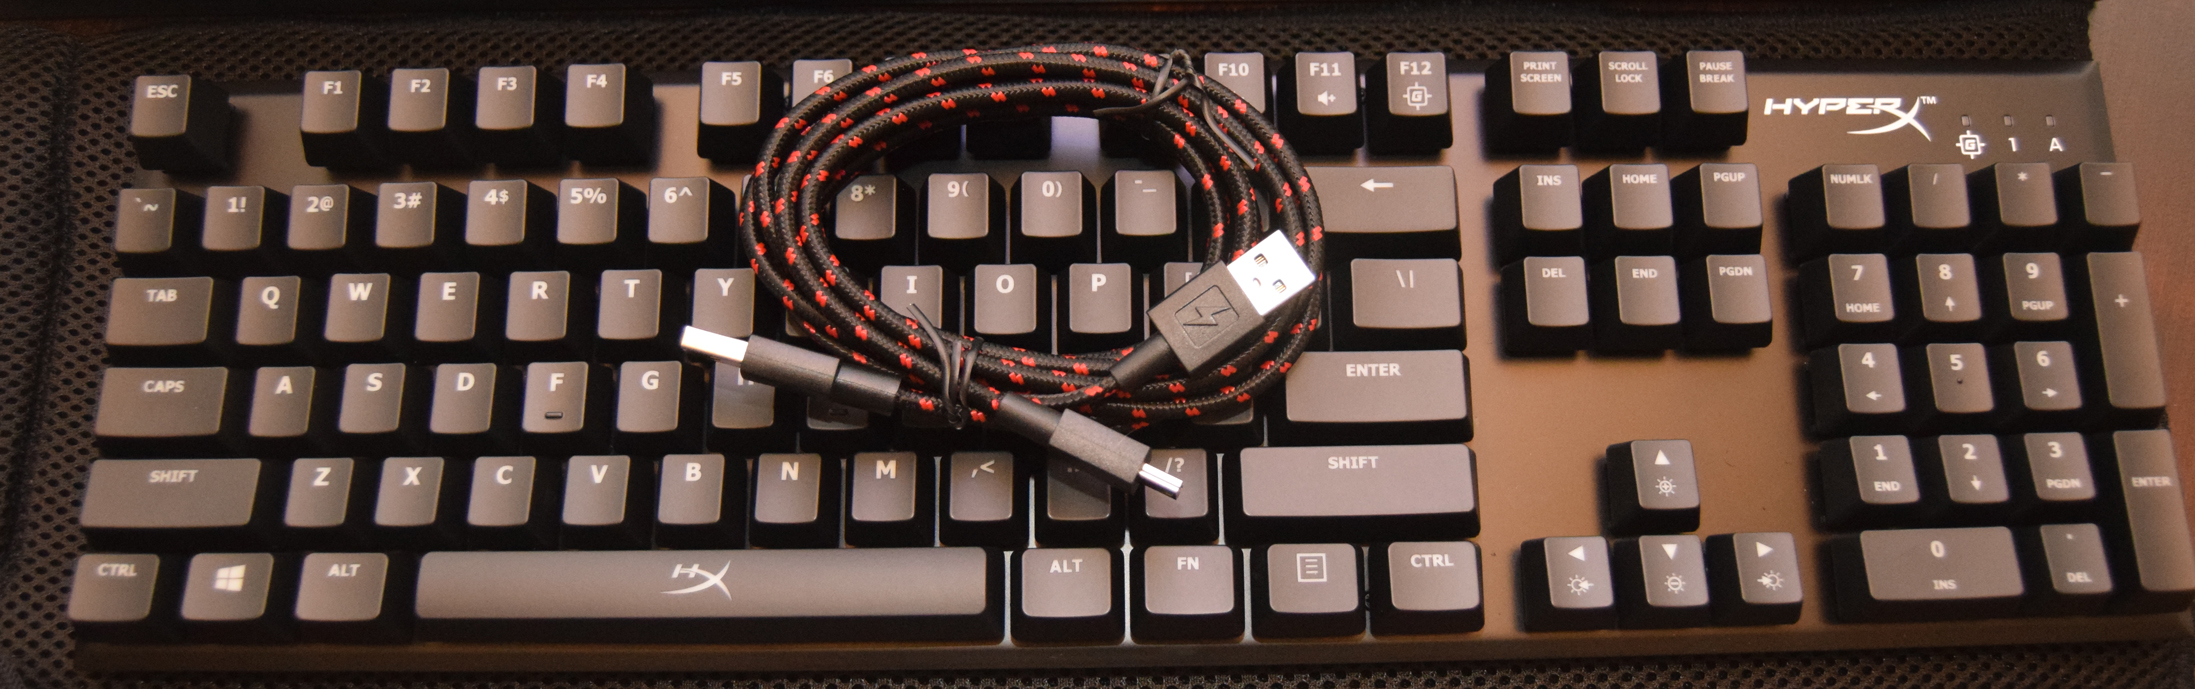 HyperX Alloy FPS Mechanical Gaming Keyboard review cable USB